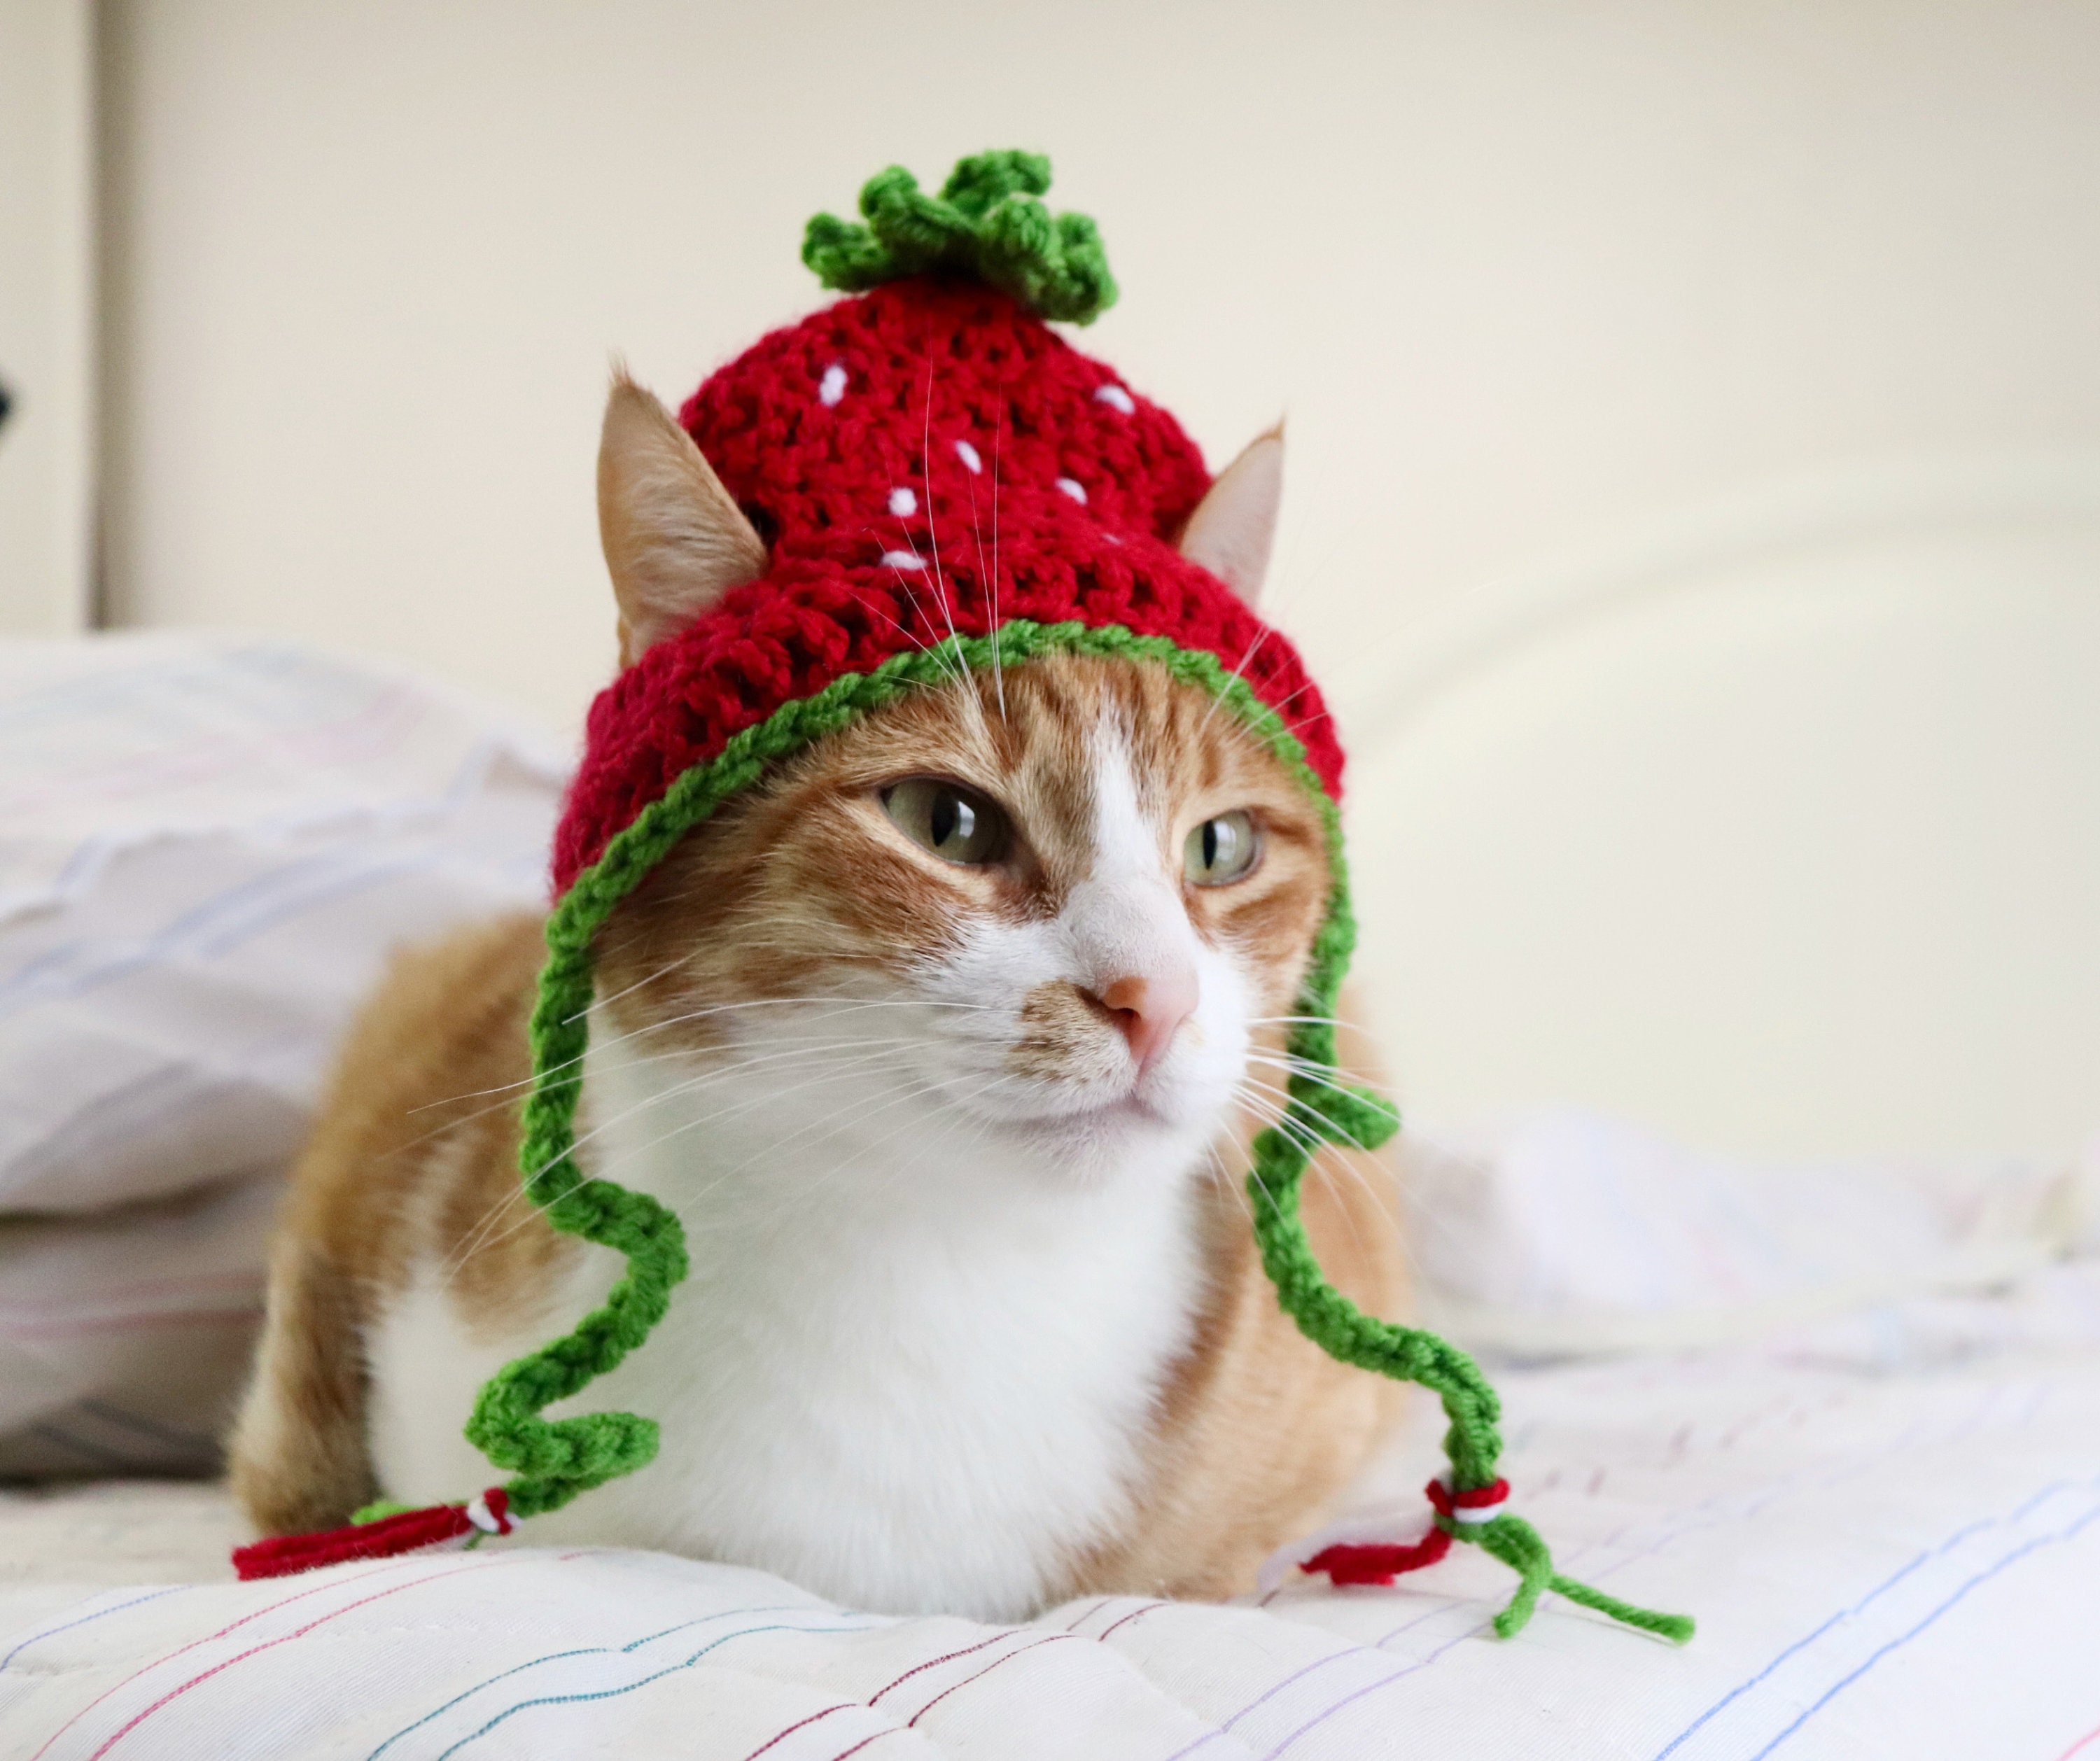 Strawberry Hat for Cats, Crochet Strawberry Hat for Cats and Small Dog  Breeds, Funny Fruit Cat / Kitten Photo Prop Accessory 